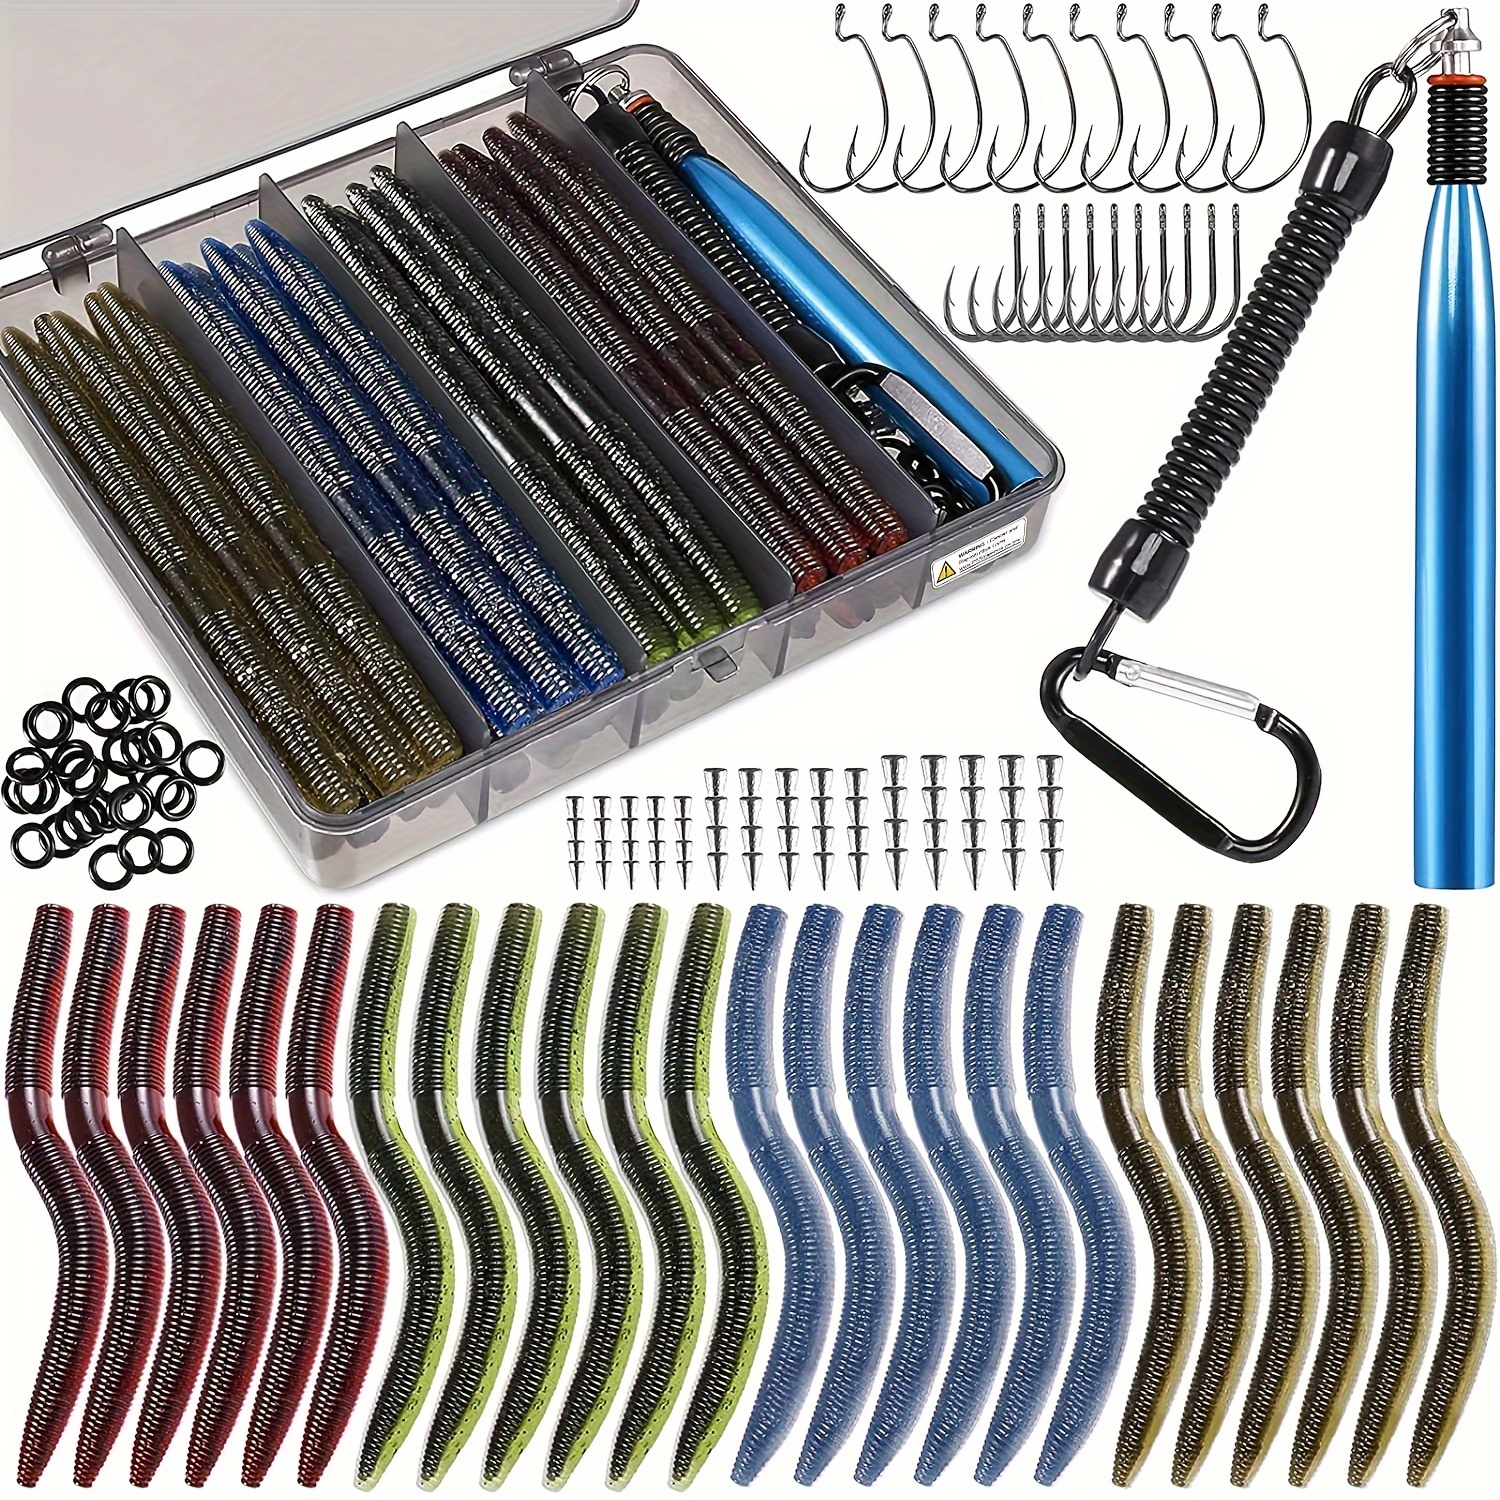 420pcs Complete Fishing Kit with Tackle Box, Pliers, Hooks, and Swivels -  Perfect for Carp Fishing and More!